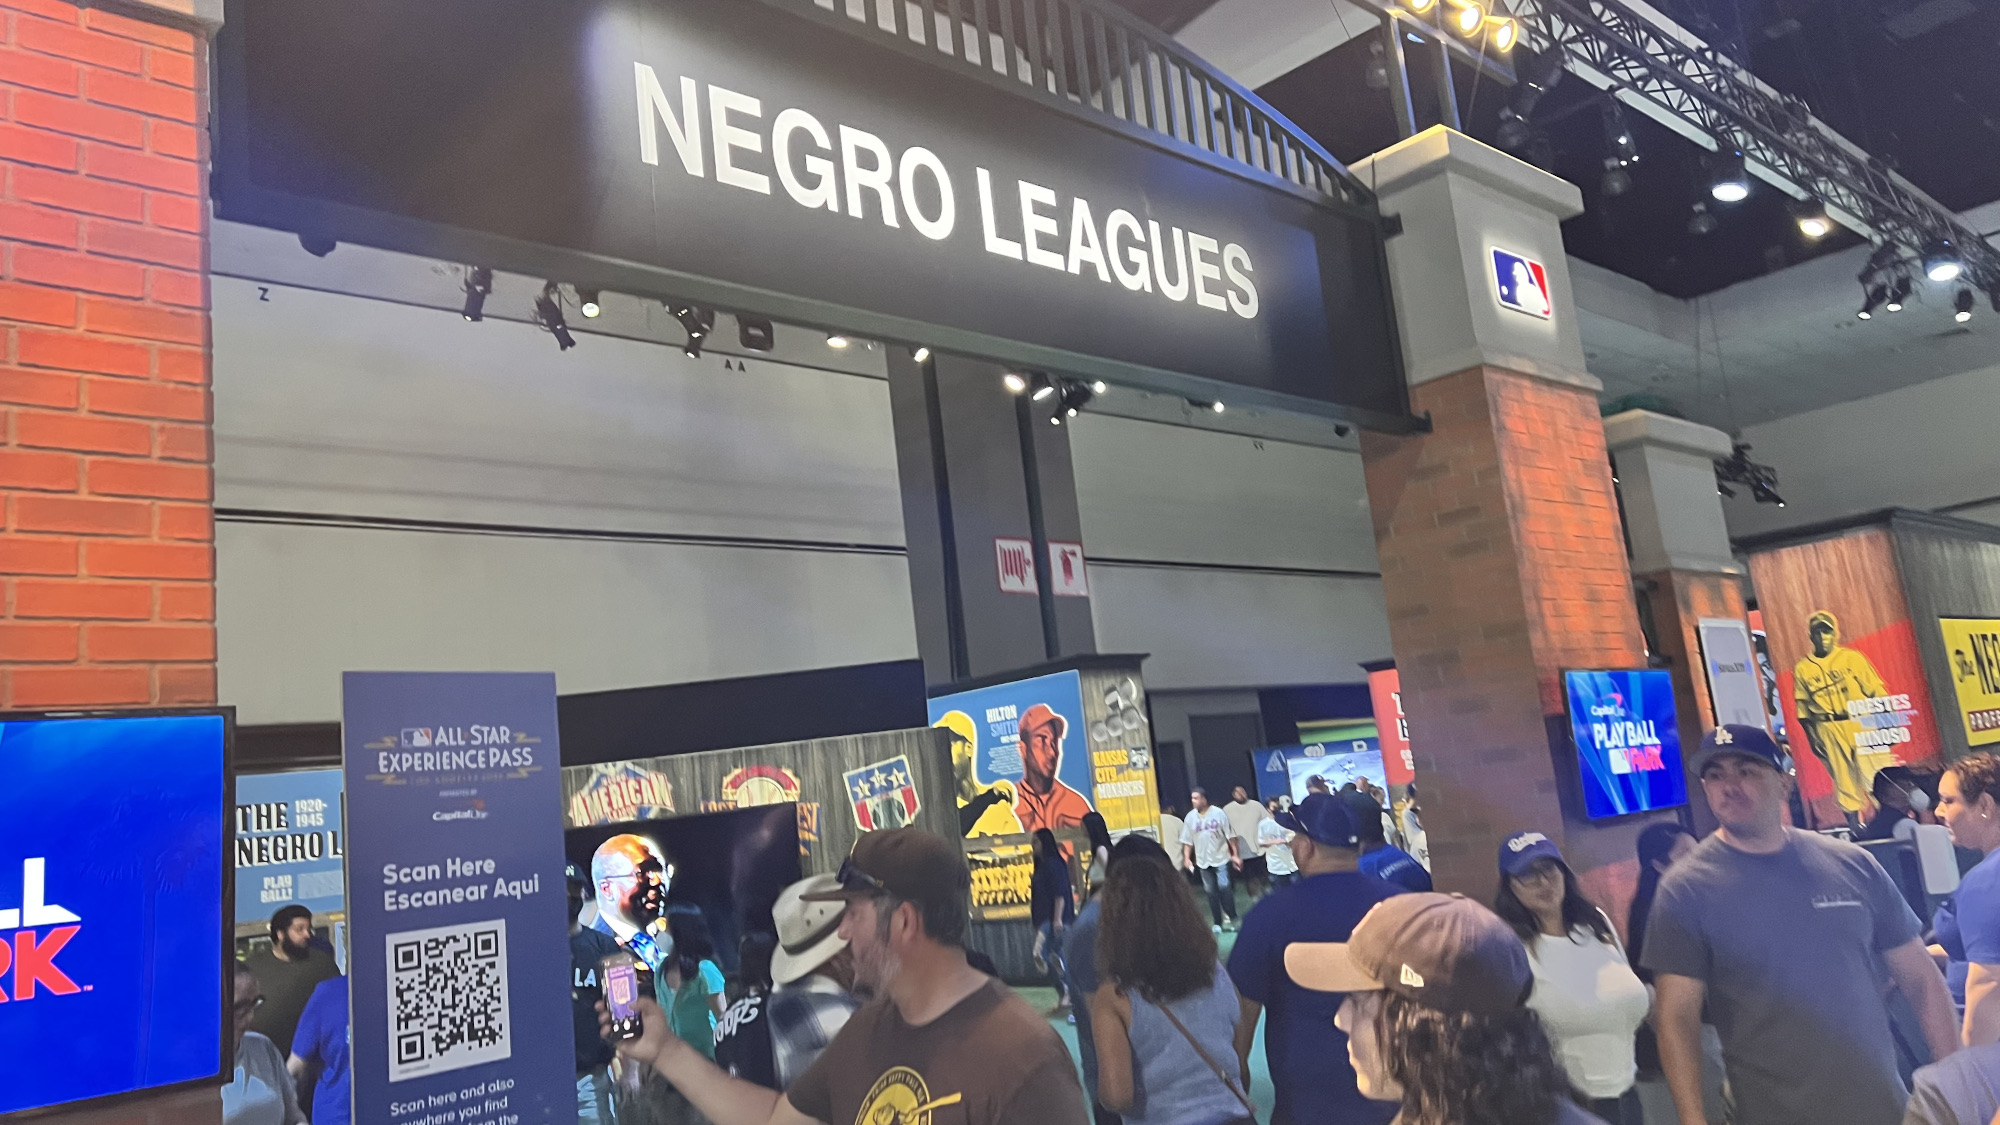 Negro Leagues Booth Entrance